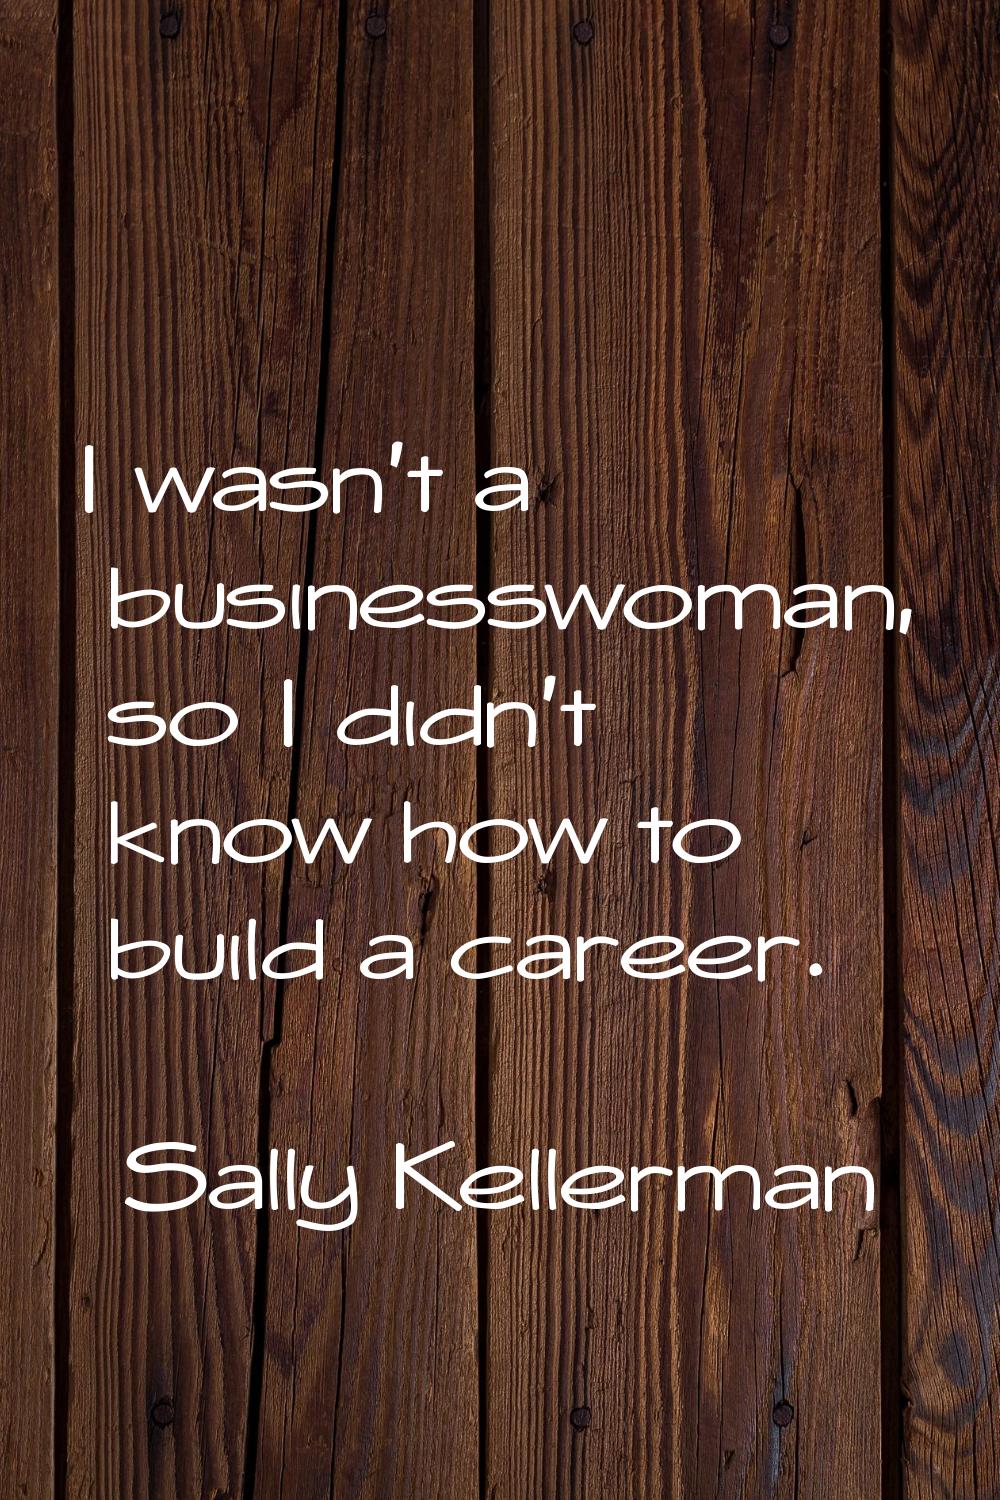 I wasn't a businesswoman, so I didn't know how to build a career.